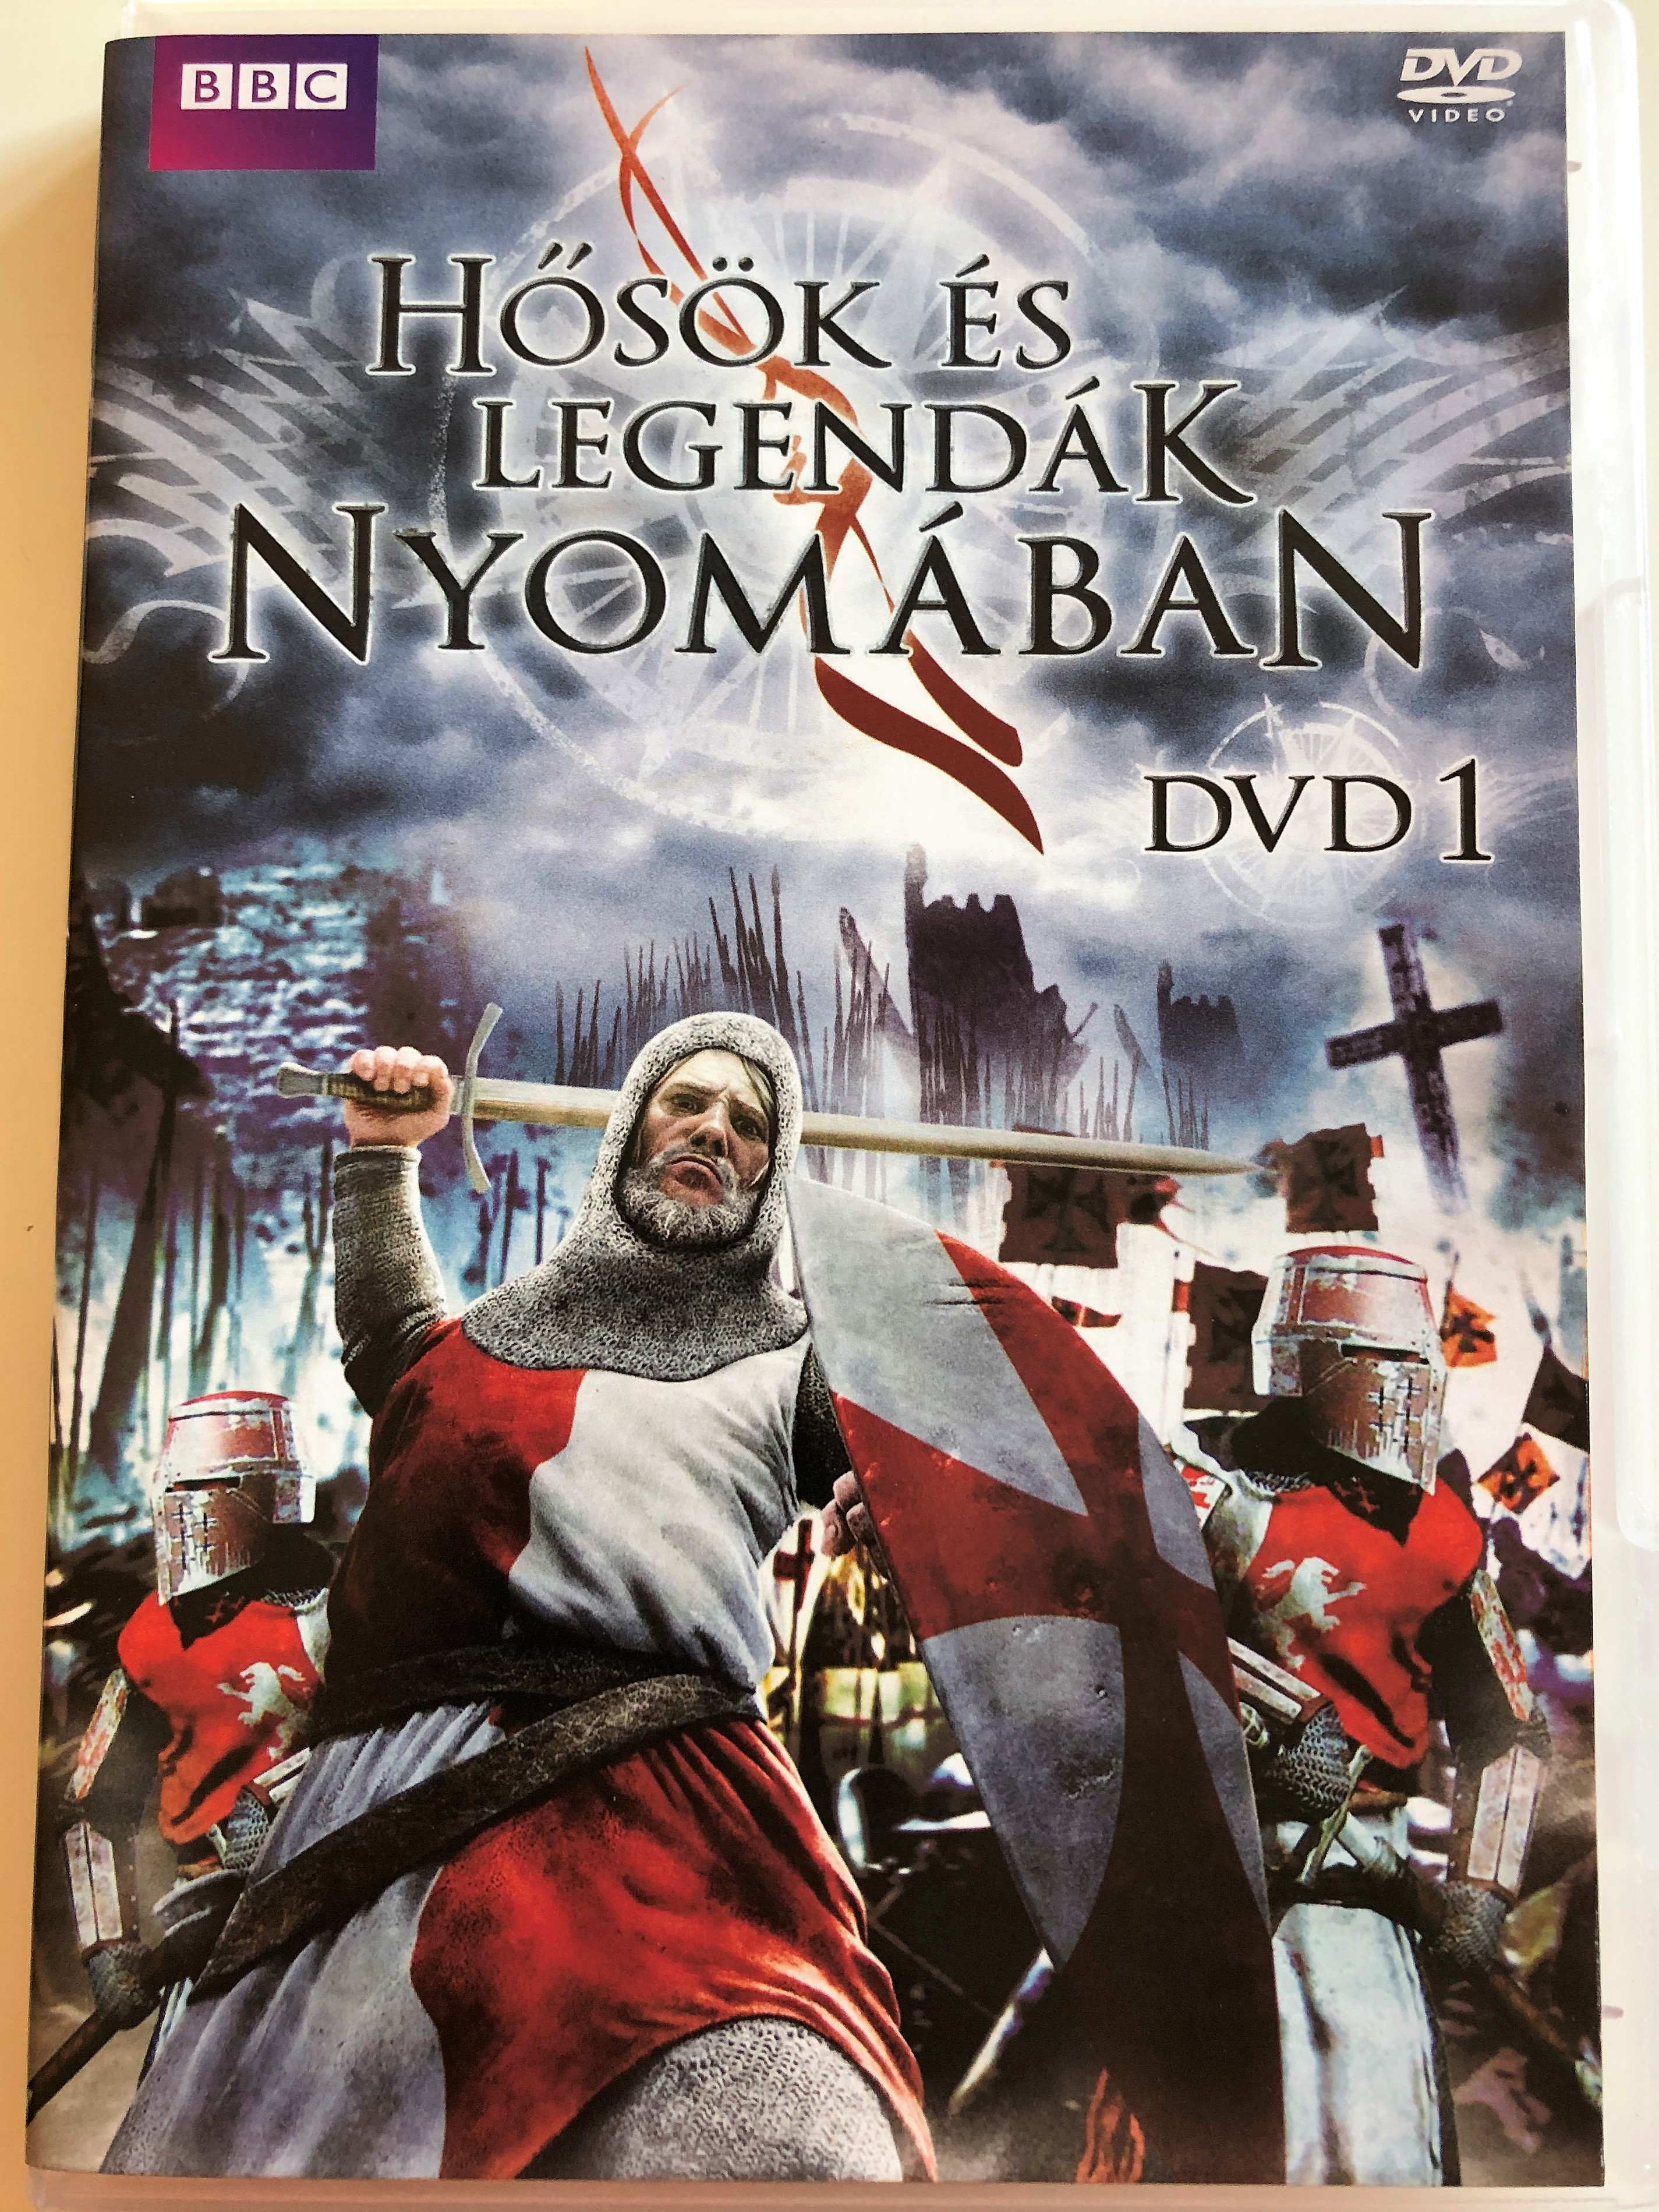 bbc-in-search-of-myths-and-heroes-dvd-2005-h-s-k-s-legend-k-nyom-ban-dvd-1-documentary-episodes-queen-of-sheba-shangri-la-narrated-by-michael-wood-1-.jpg